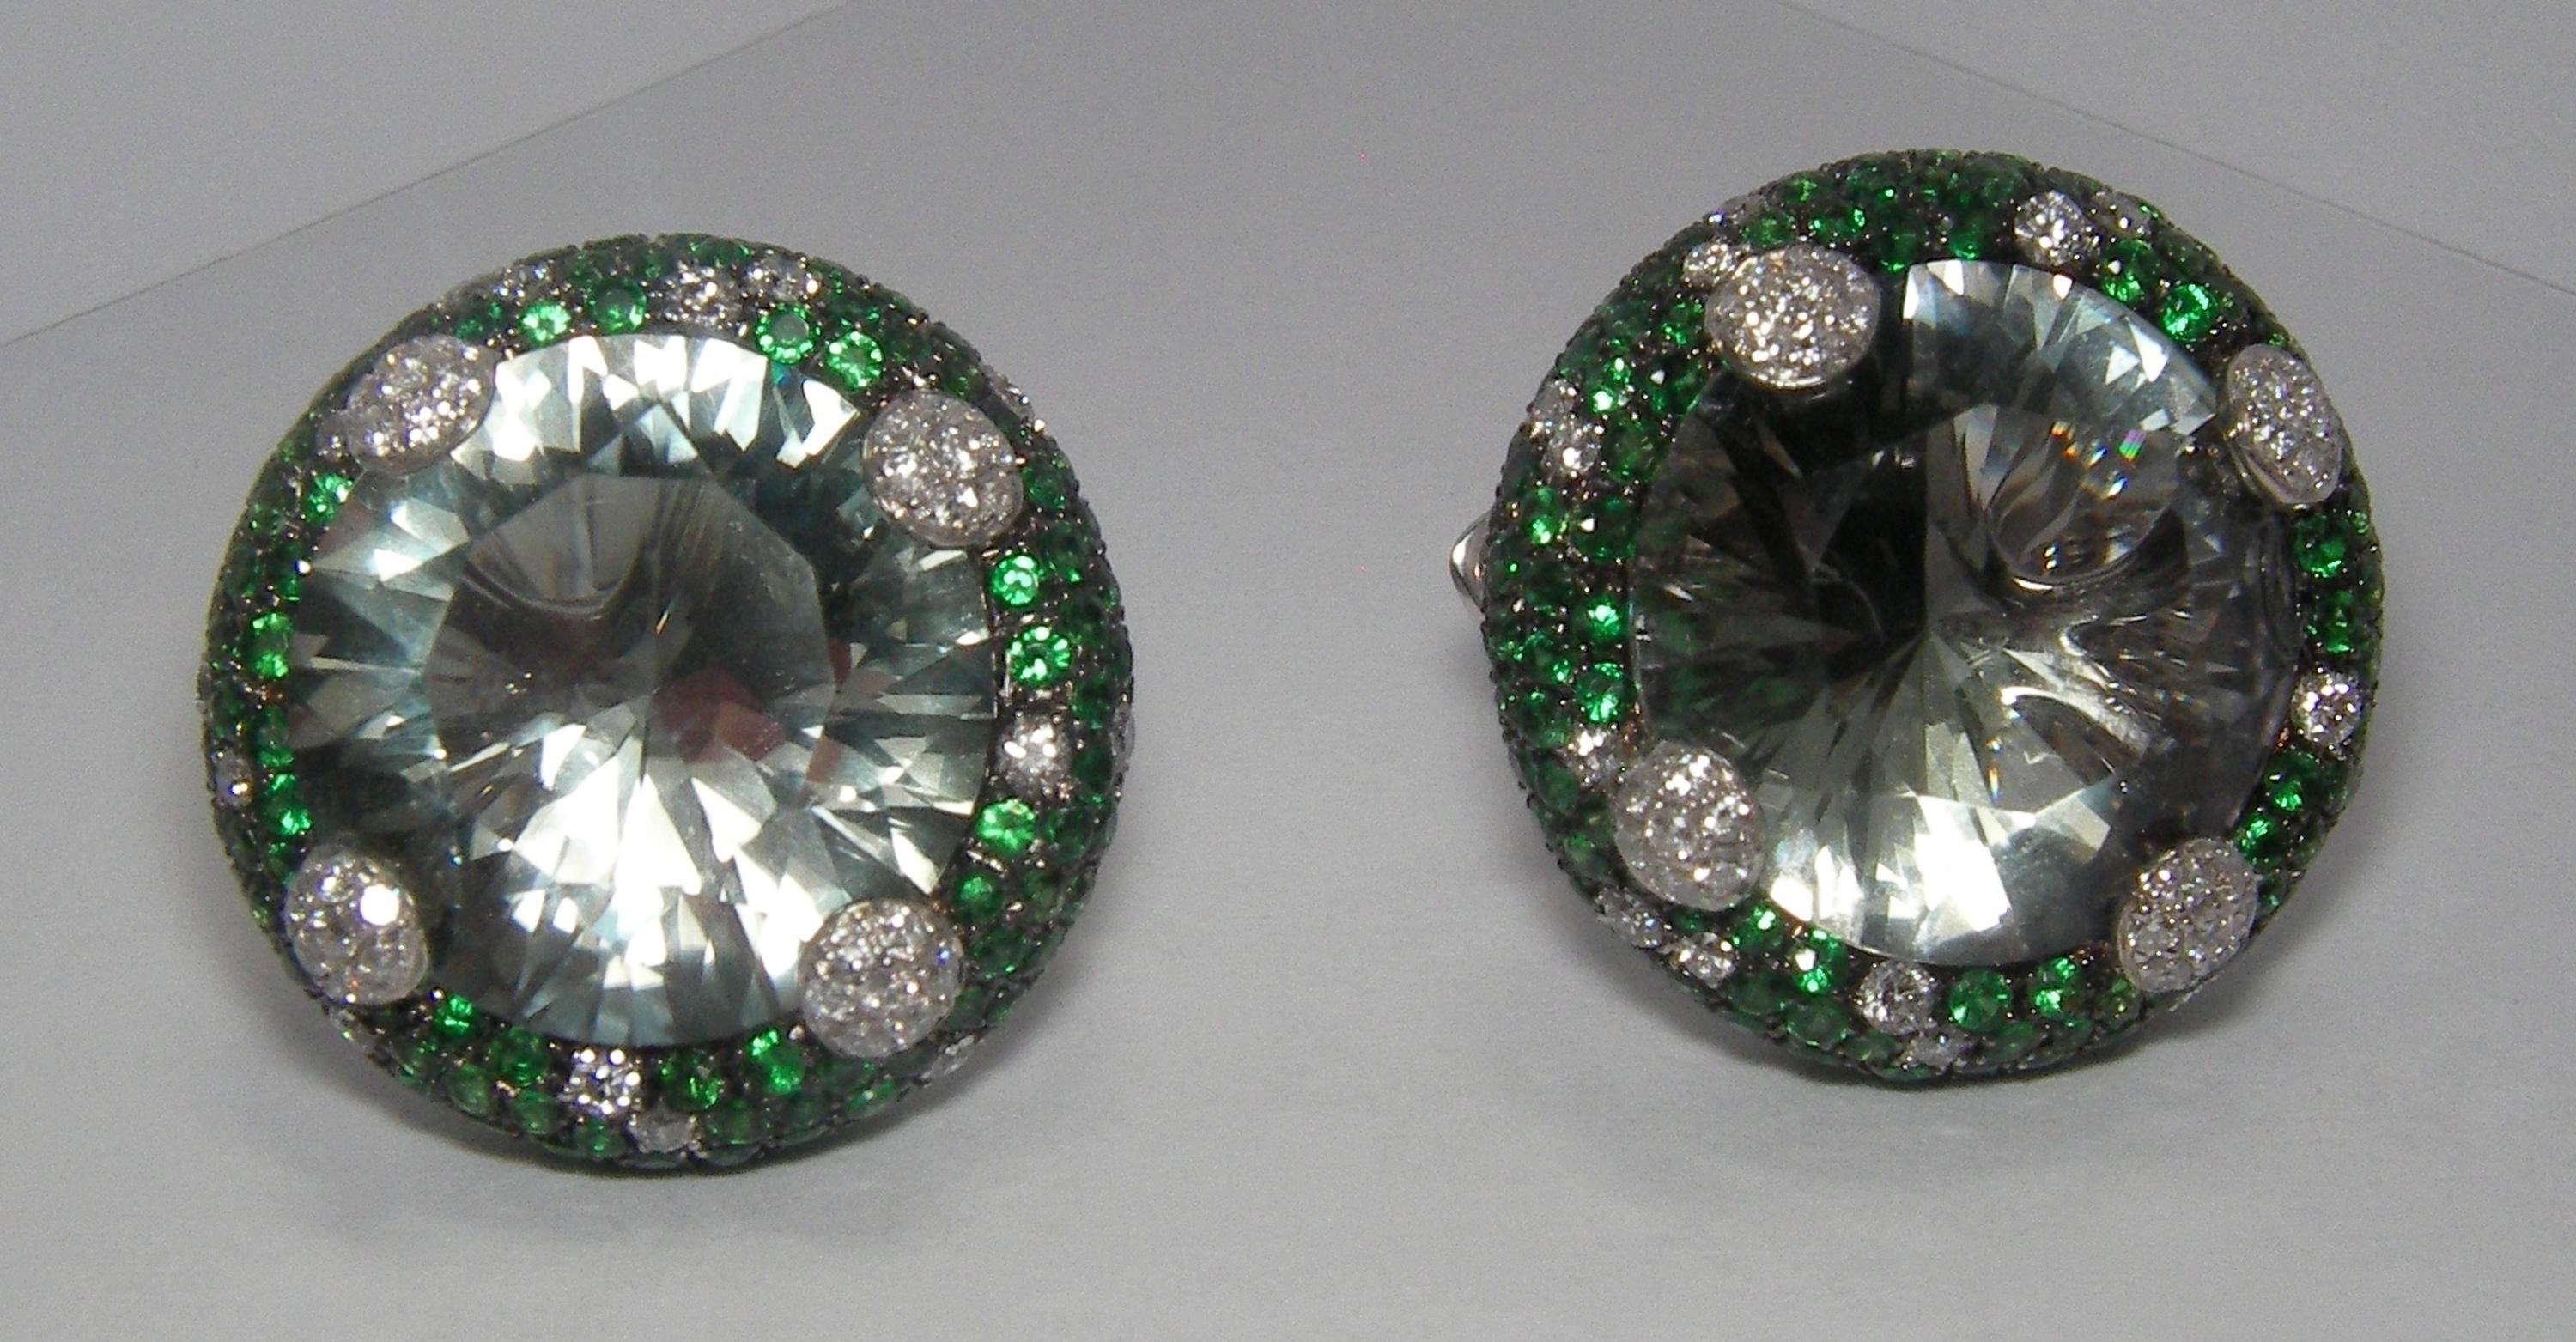 These 18 Karat White Gold earrings feature Diamonds and Tsavorite surrounding one round cut Amethyst center stone in each earring.
The vivid green is inspired by the Italian culture where the color is the definition hope while green Amethyst is to